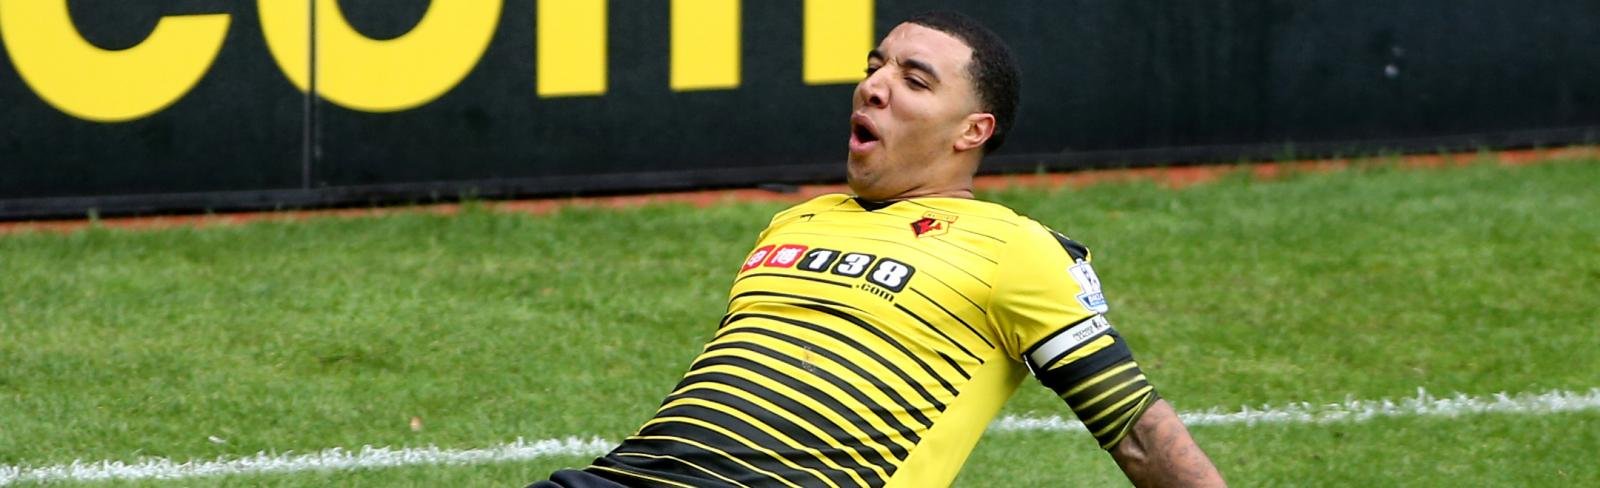 Watford vs Leeds United: FA Cup Preview & Prediction